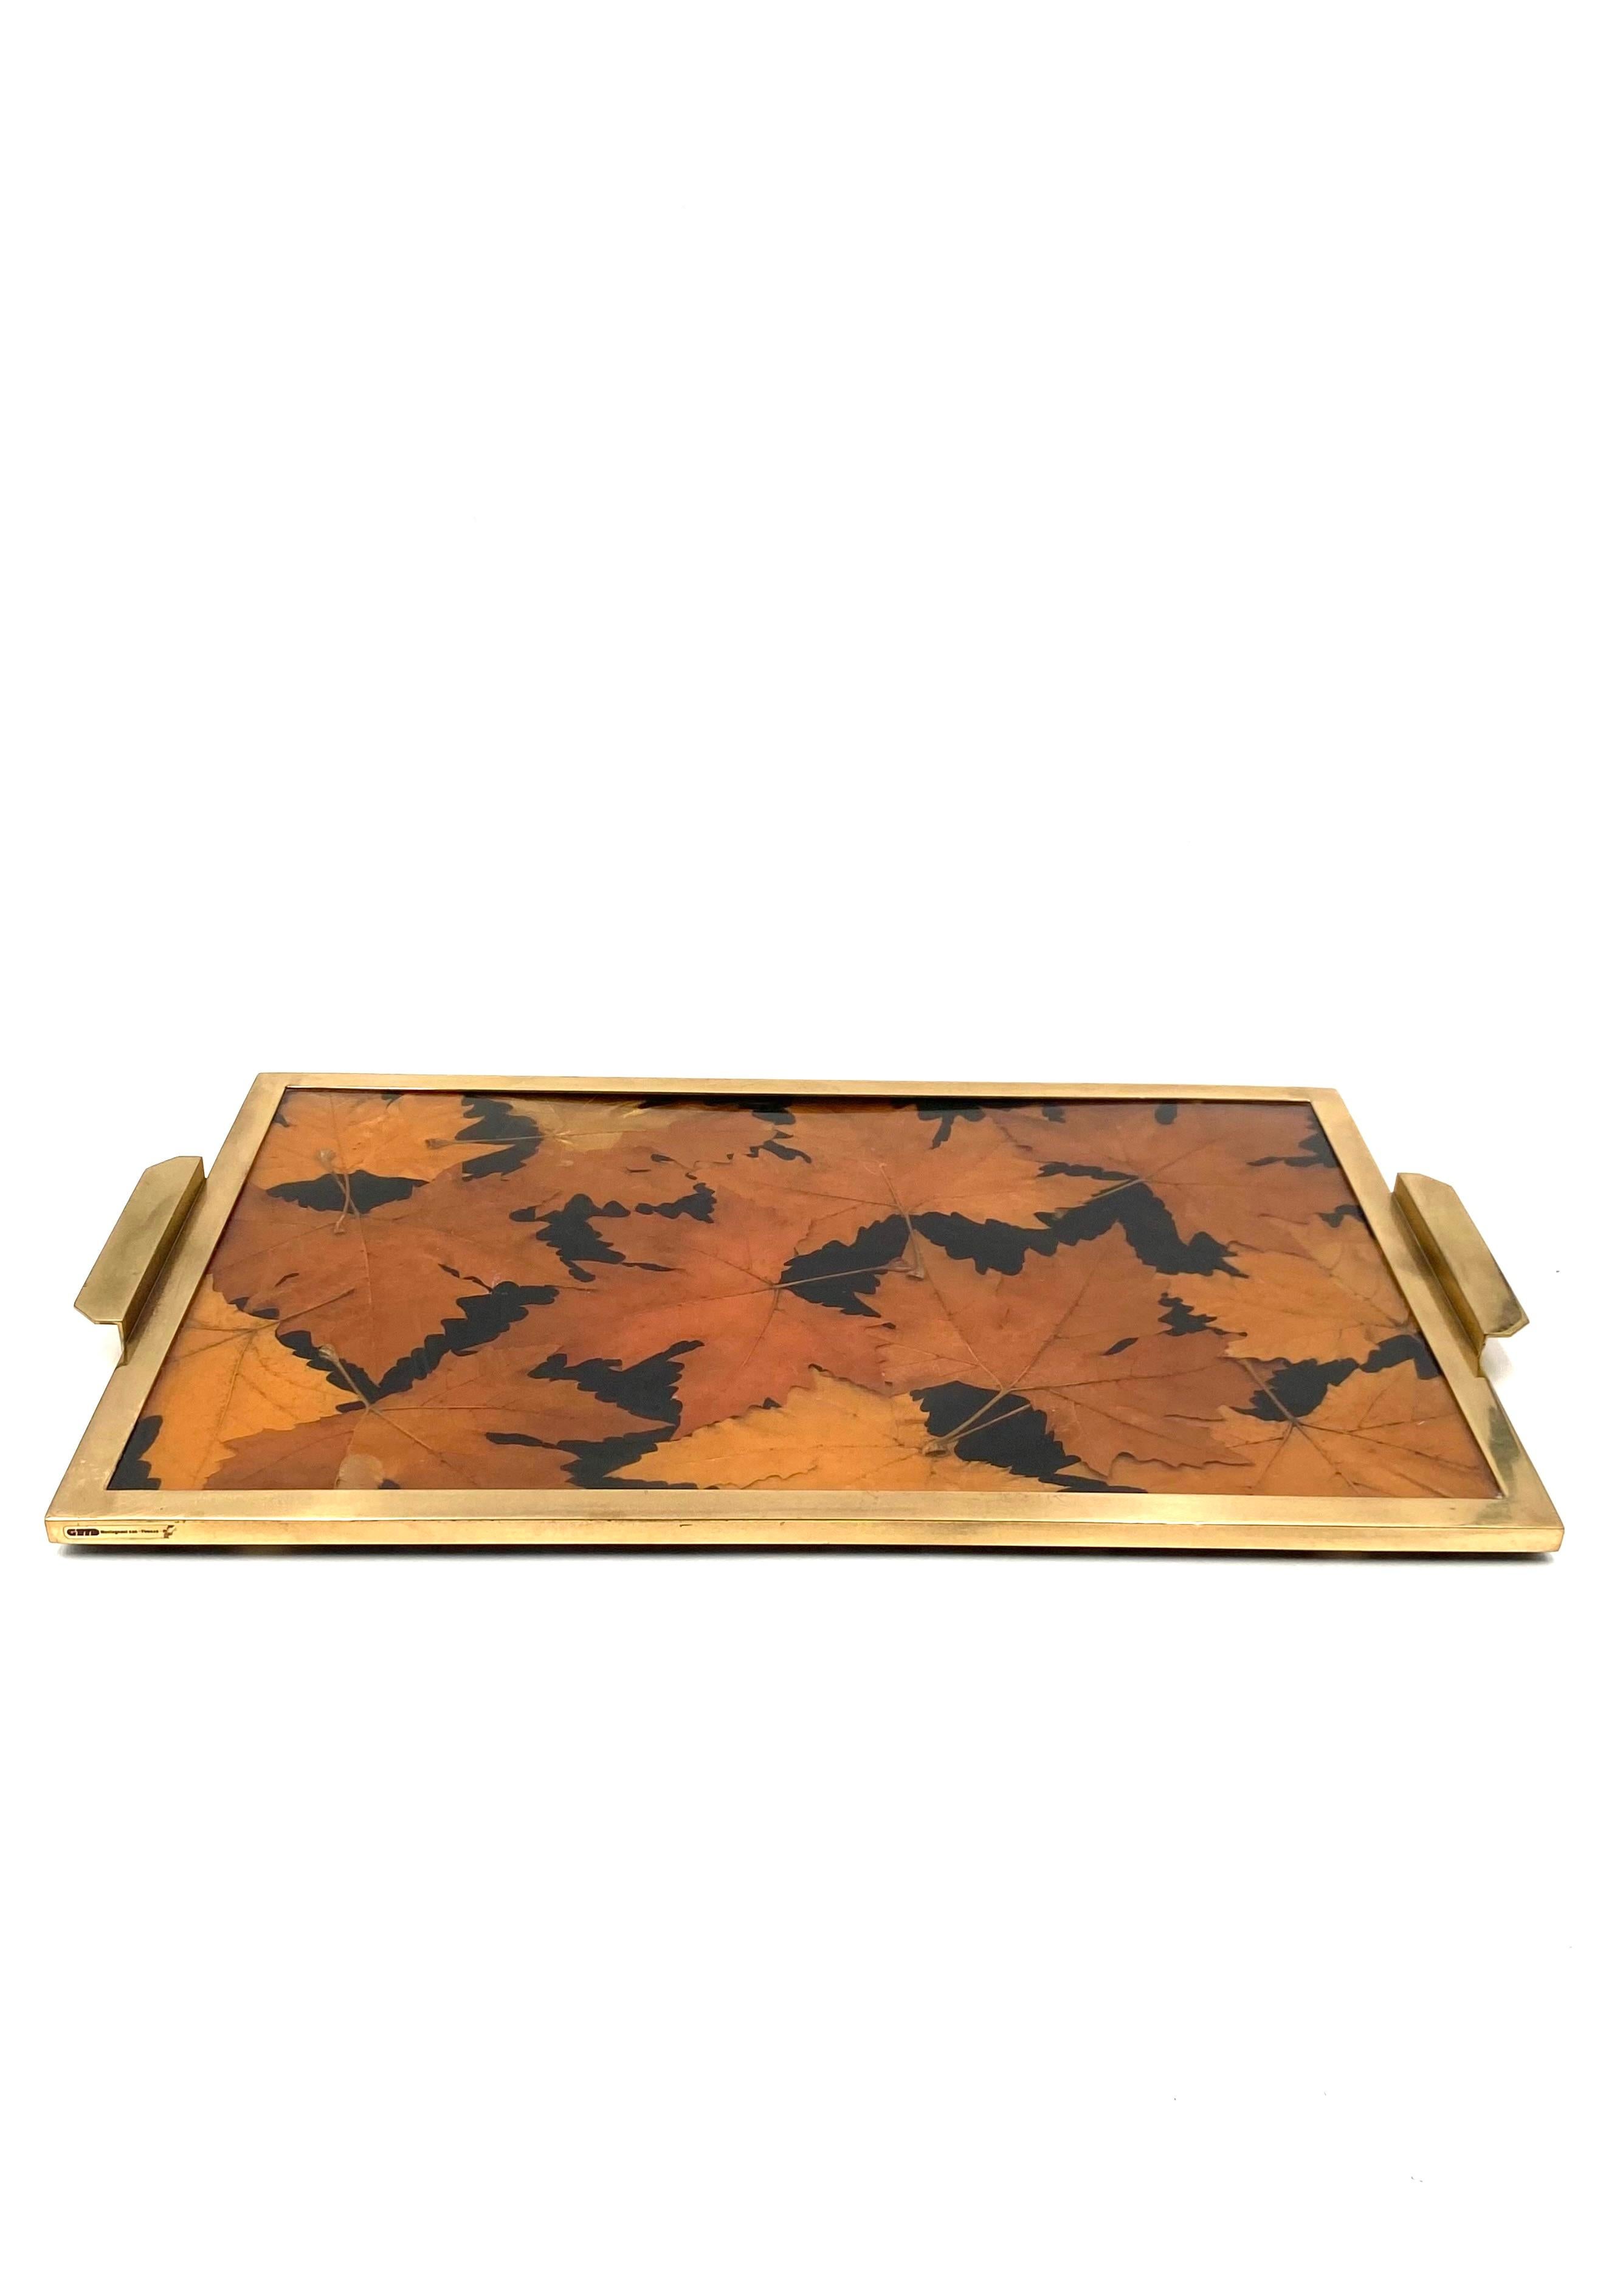 Hollywood regency brass and leaves resin tray, Montagnani Firenze Italy 1970s For Sale 5